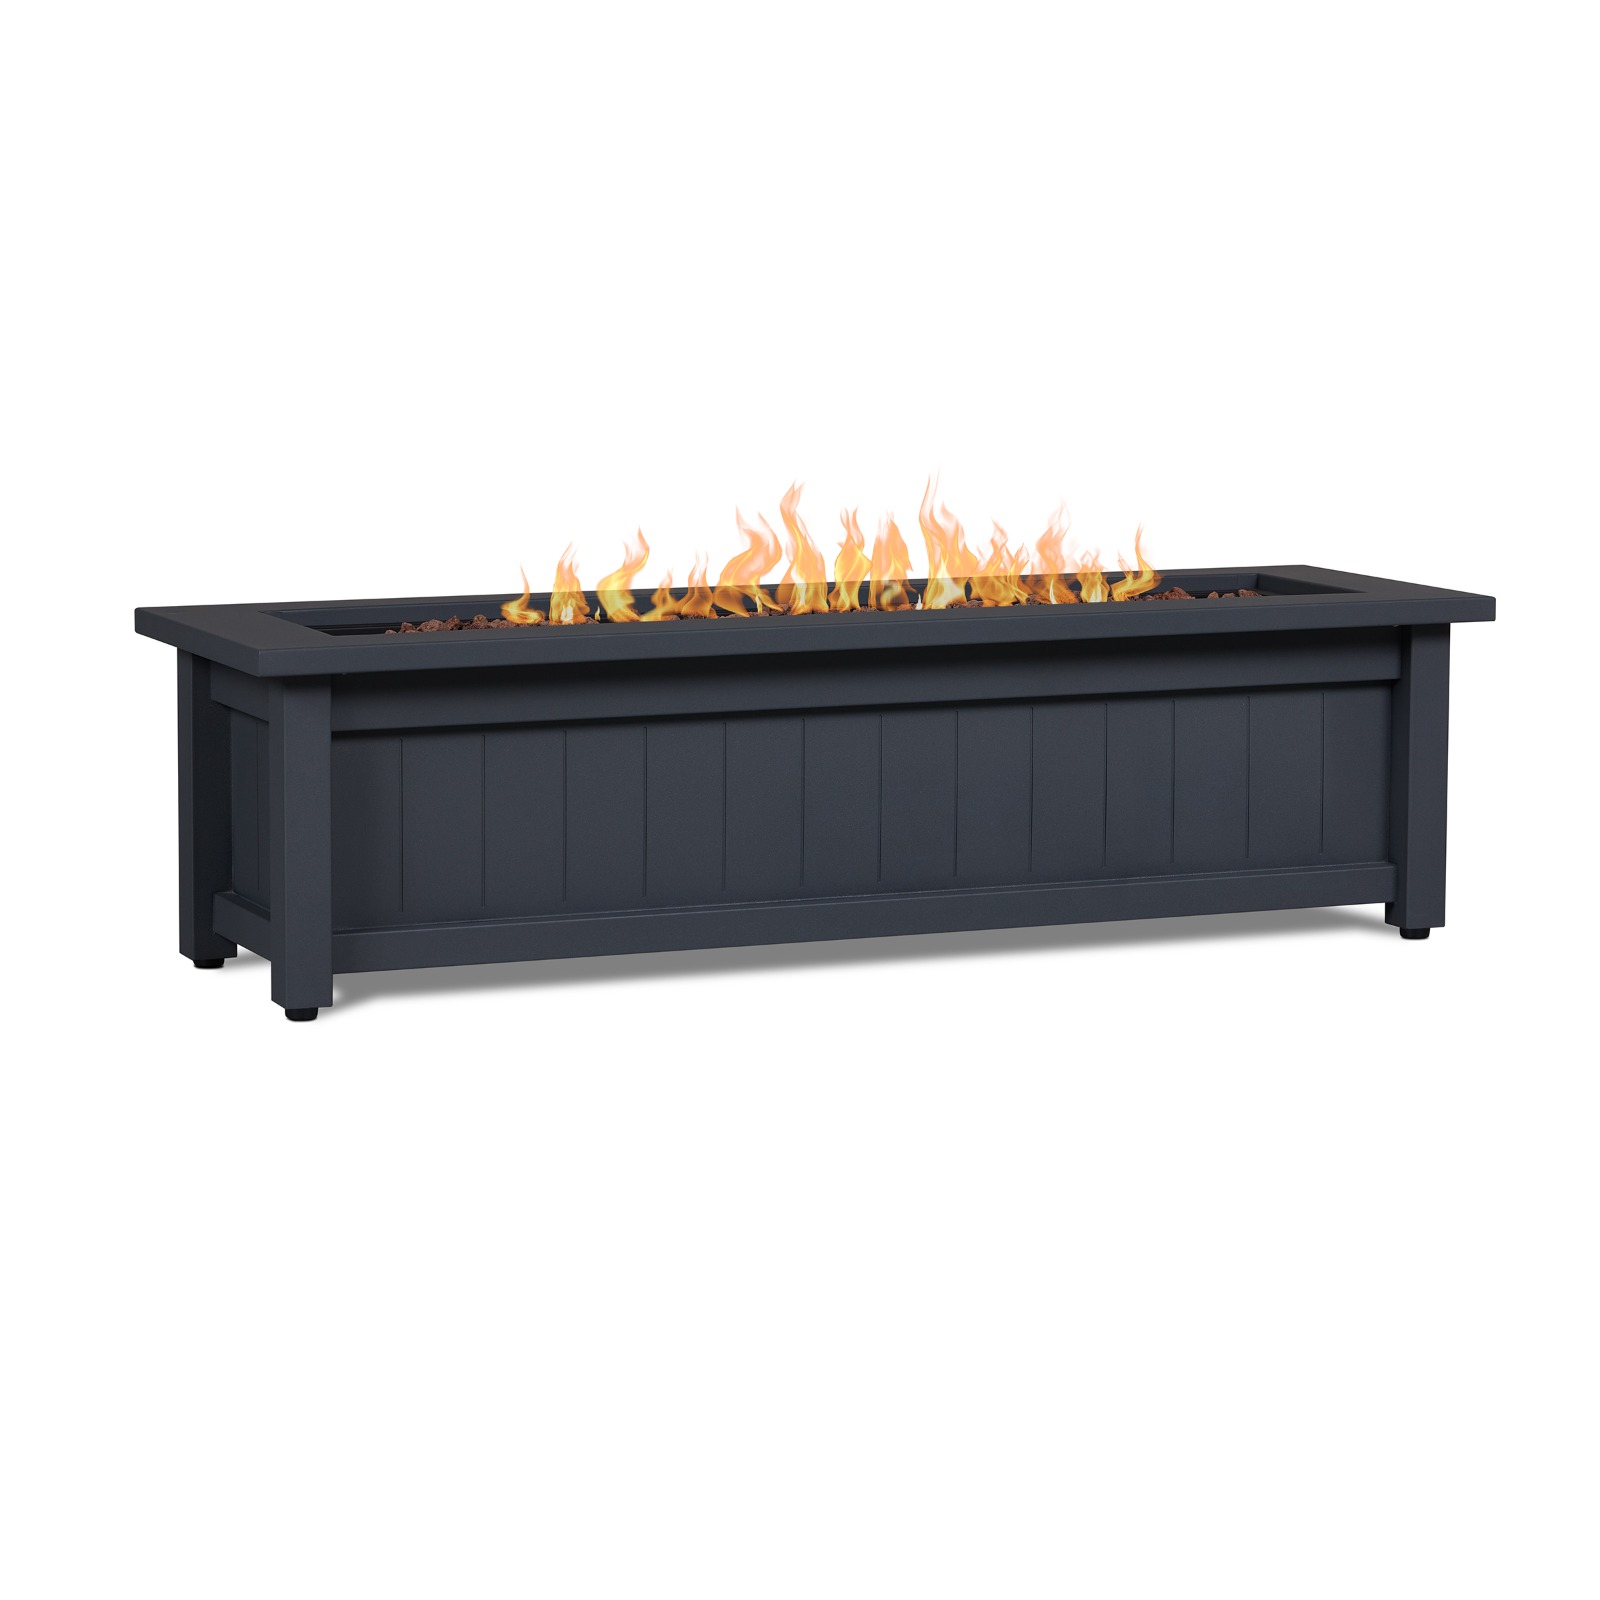 Ortun Rectangle Propane Fire Pit Outdoor Fireplace Fire Table for Backyard or Patio